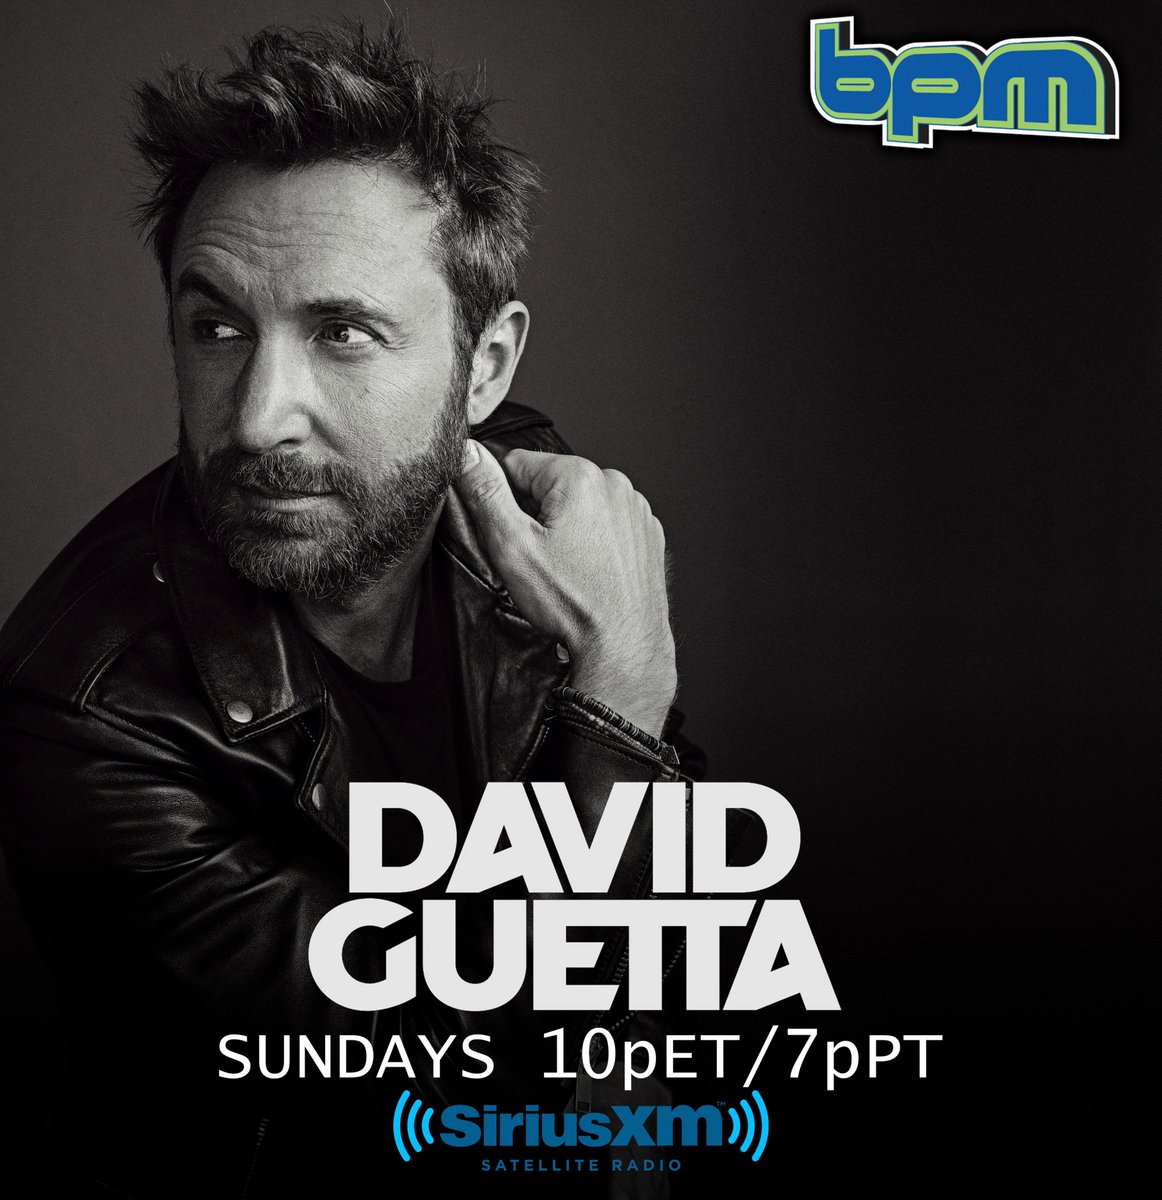 My new weekly show begins tonight on @sxmElectro #bpm Ch51!
Every Sunday night at 10p Eastern/7p Pacific. #GuettaBPM https://t.co/wSC1cVqXh1